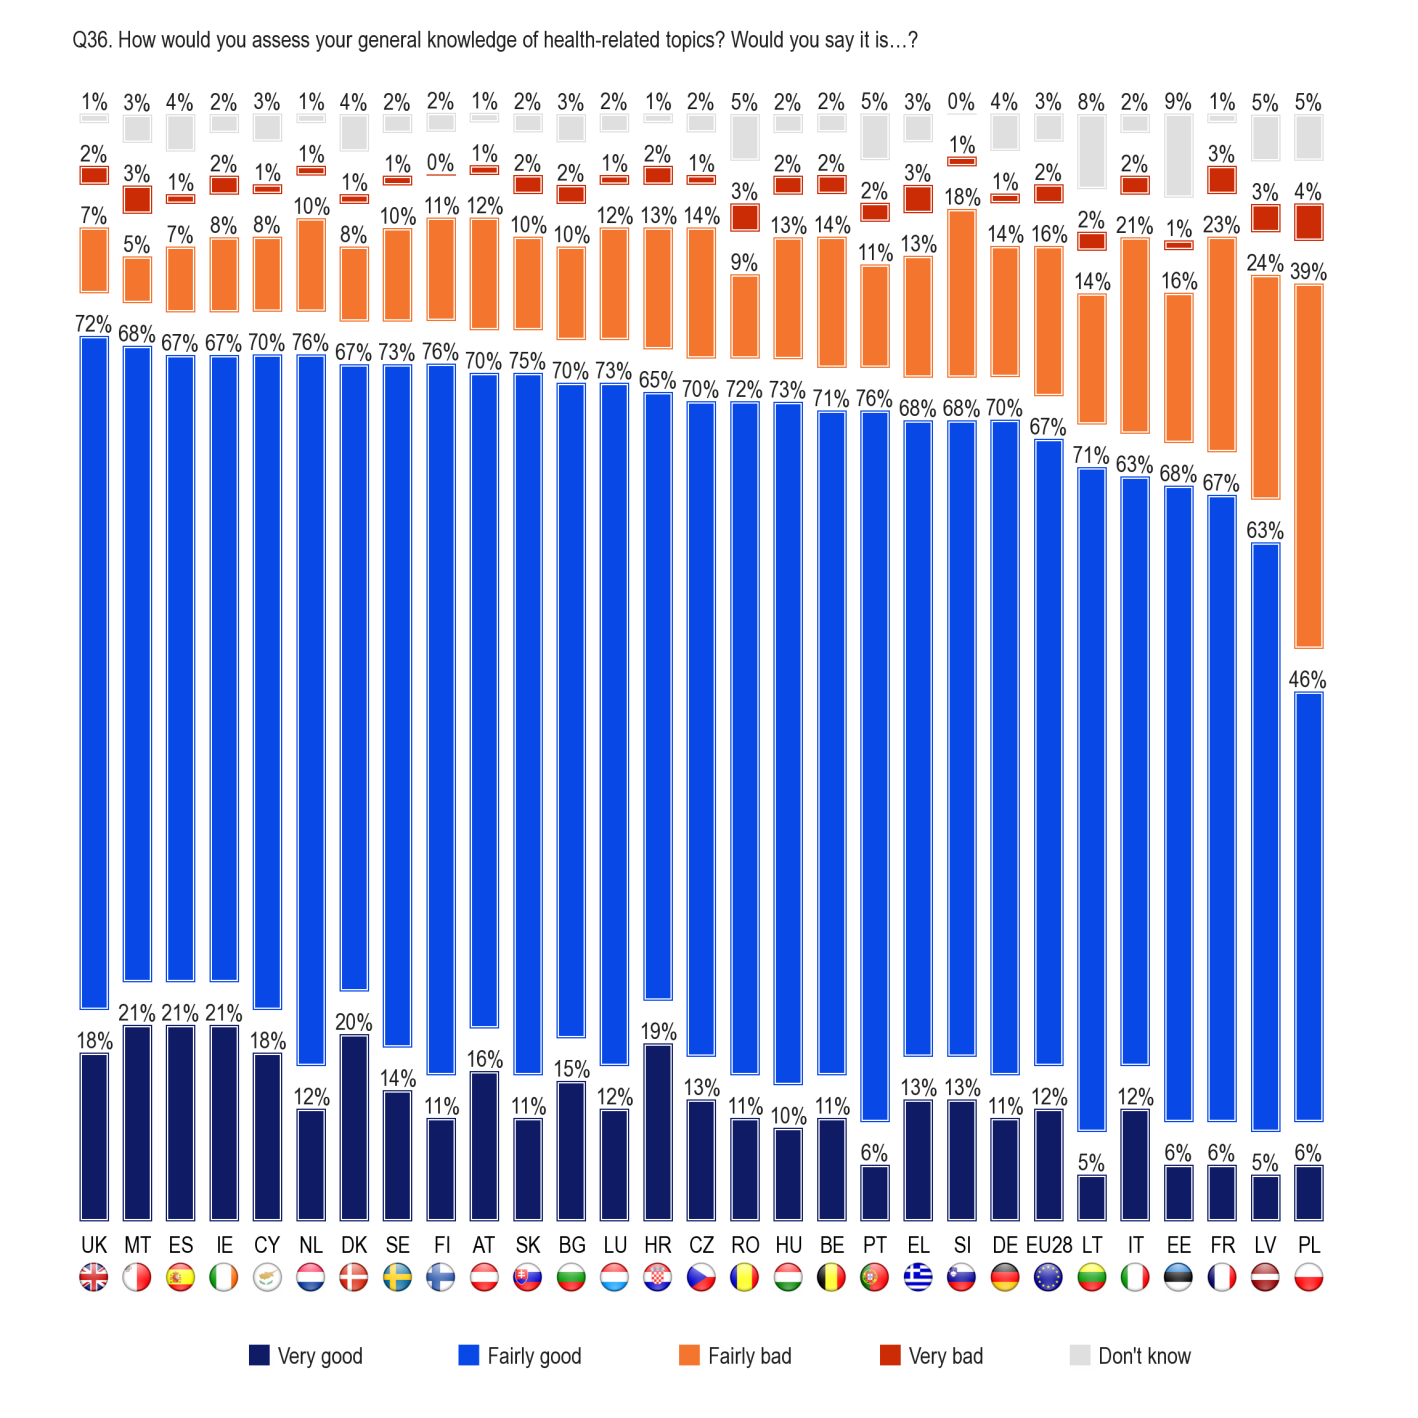 FLASH EUROBAROMETER In 22 out of 28 Member States, over 80% of people feel that they have good knowledge of health-related topics.